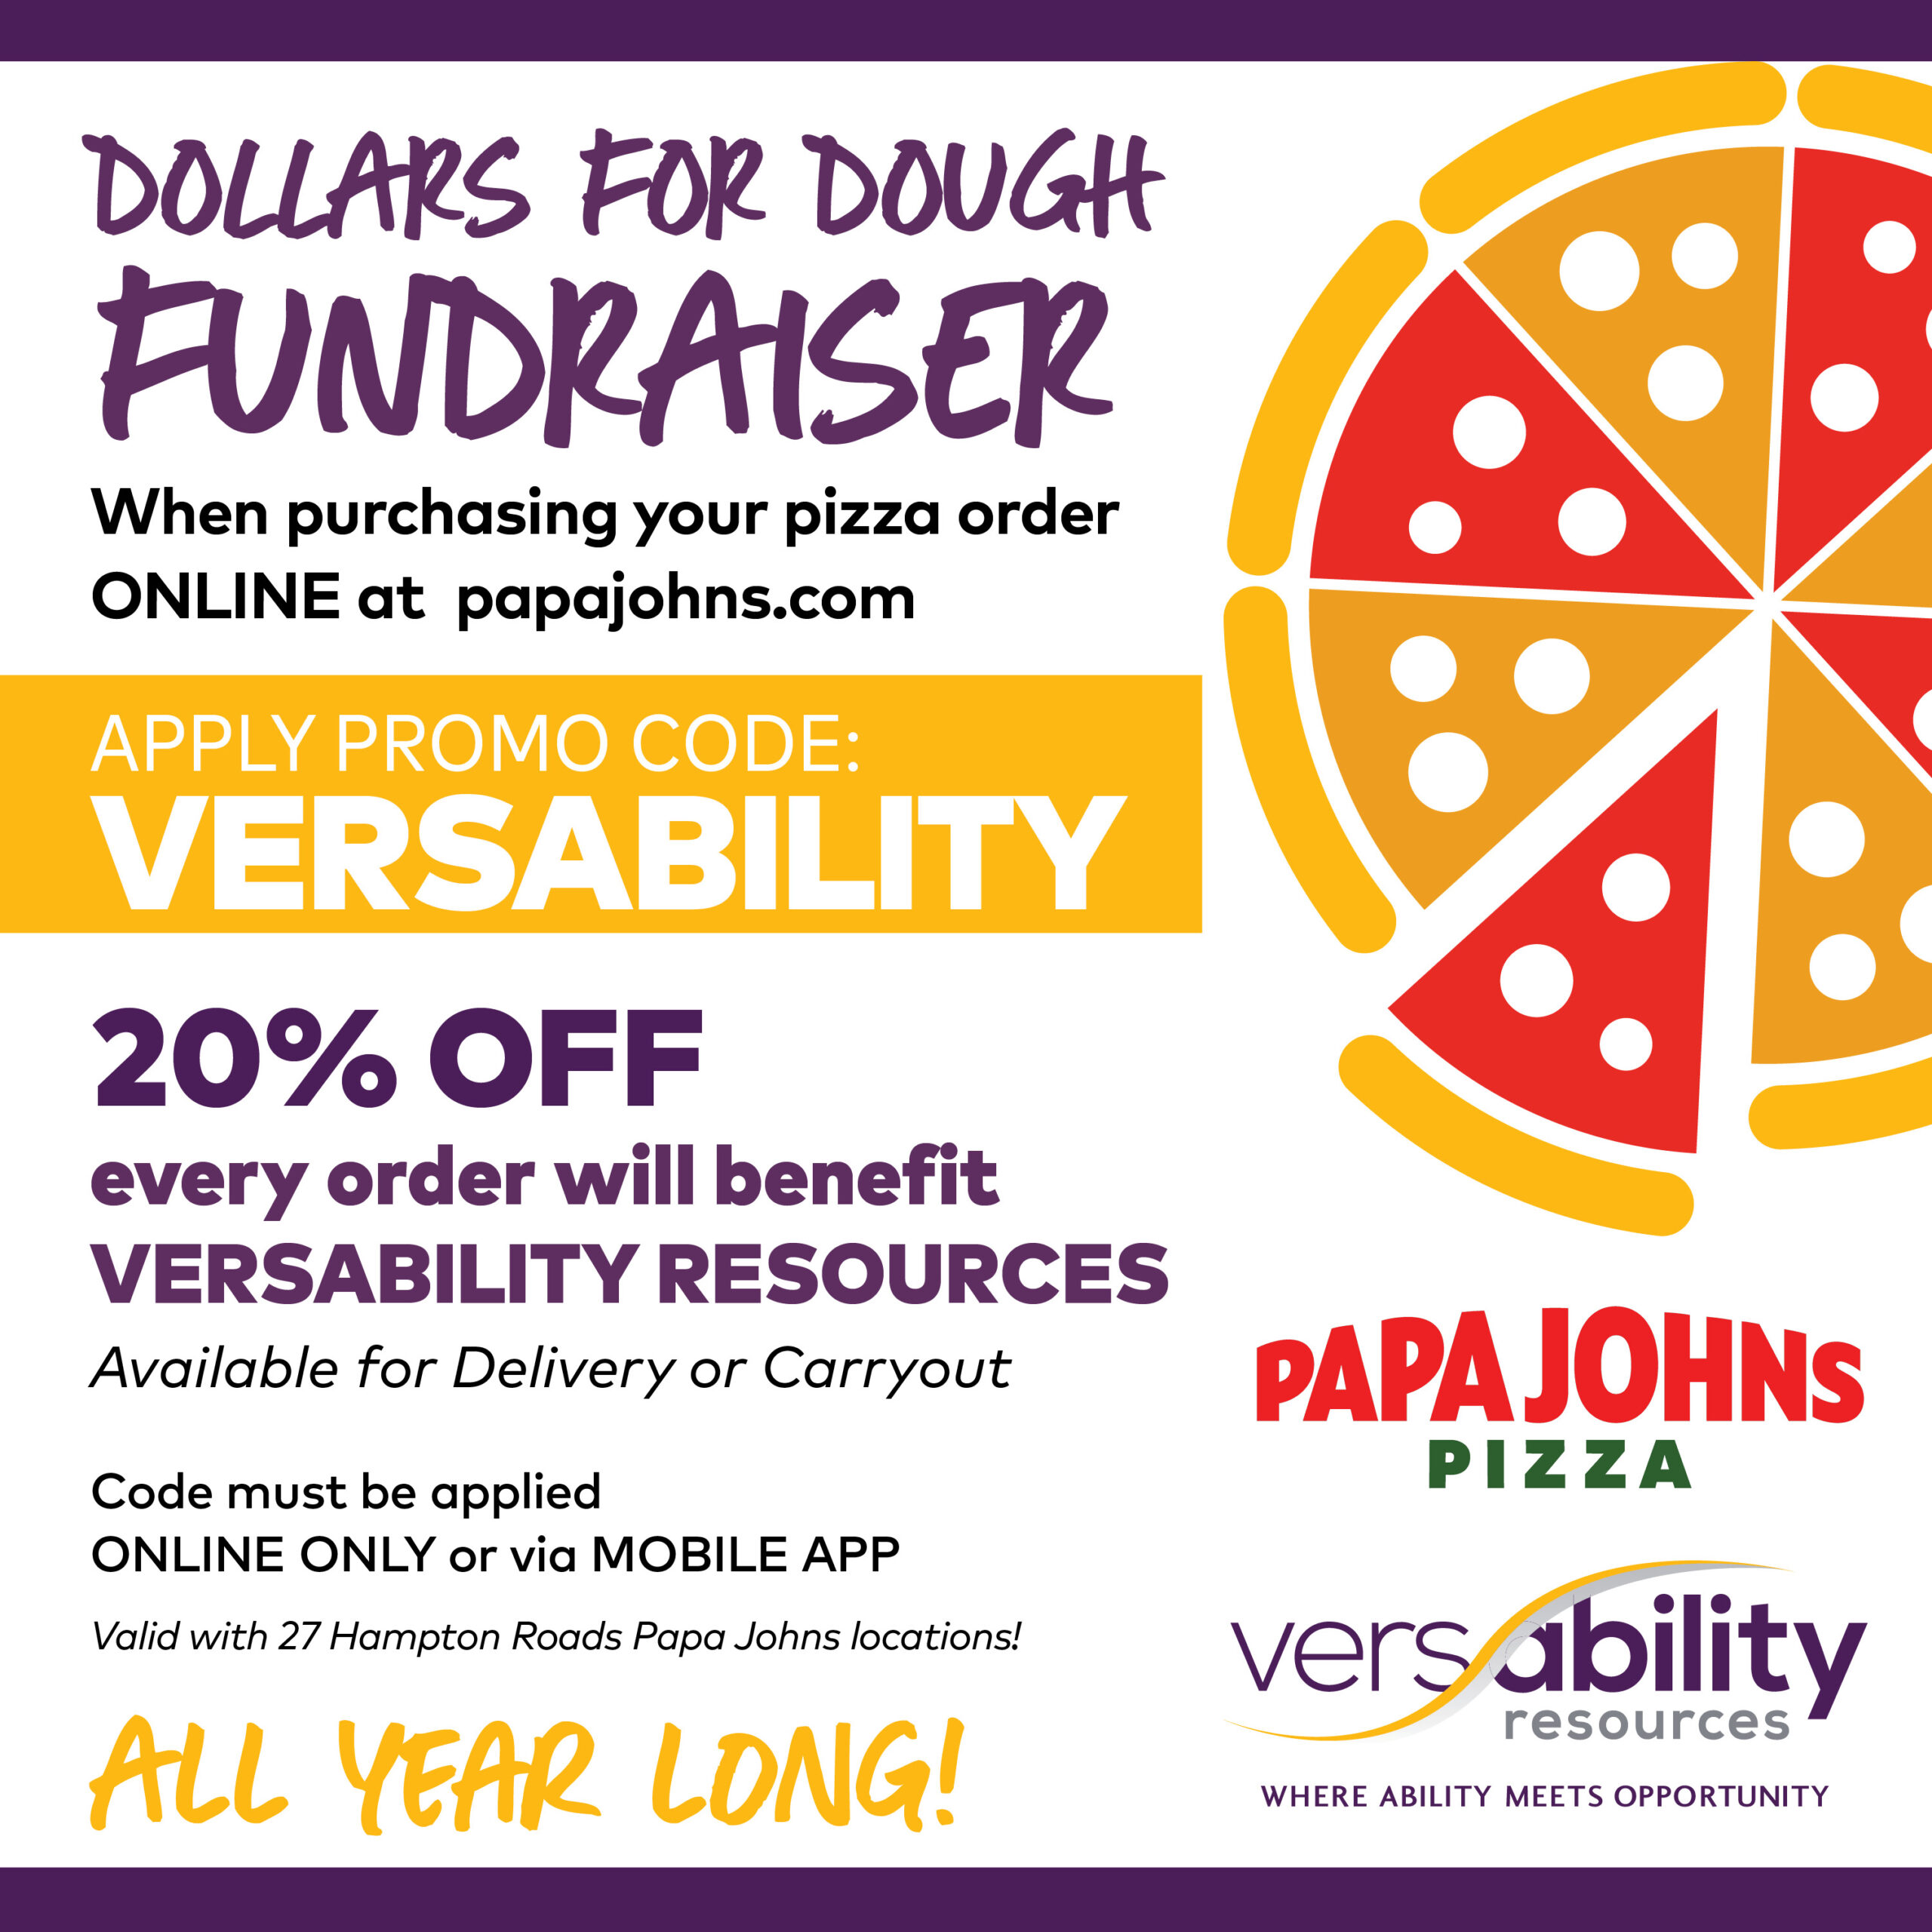 Order Your Next Pizza from Papa John’s to Support VersAbility Resources